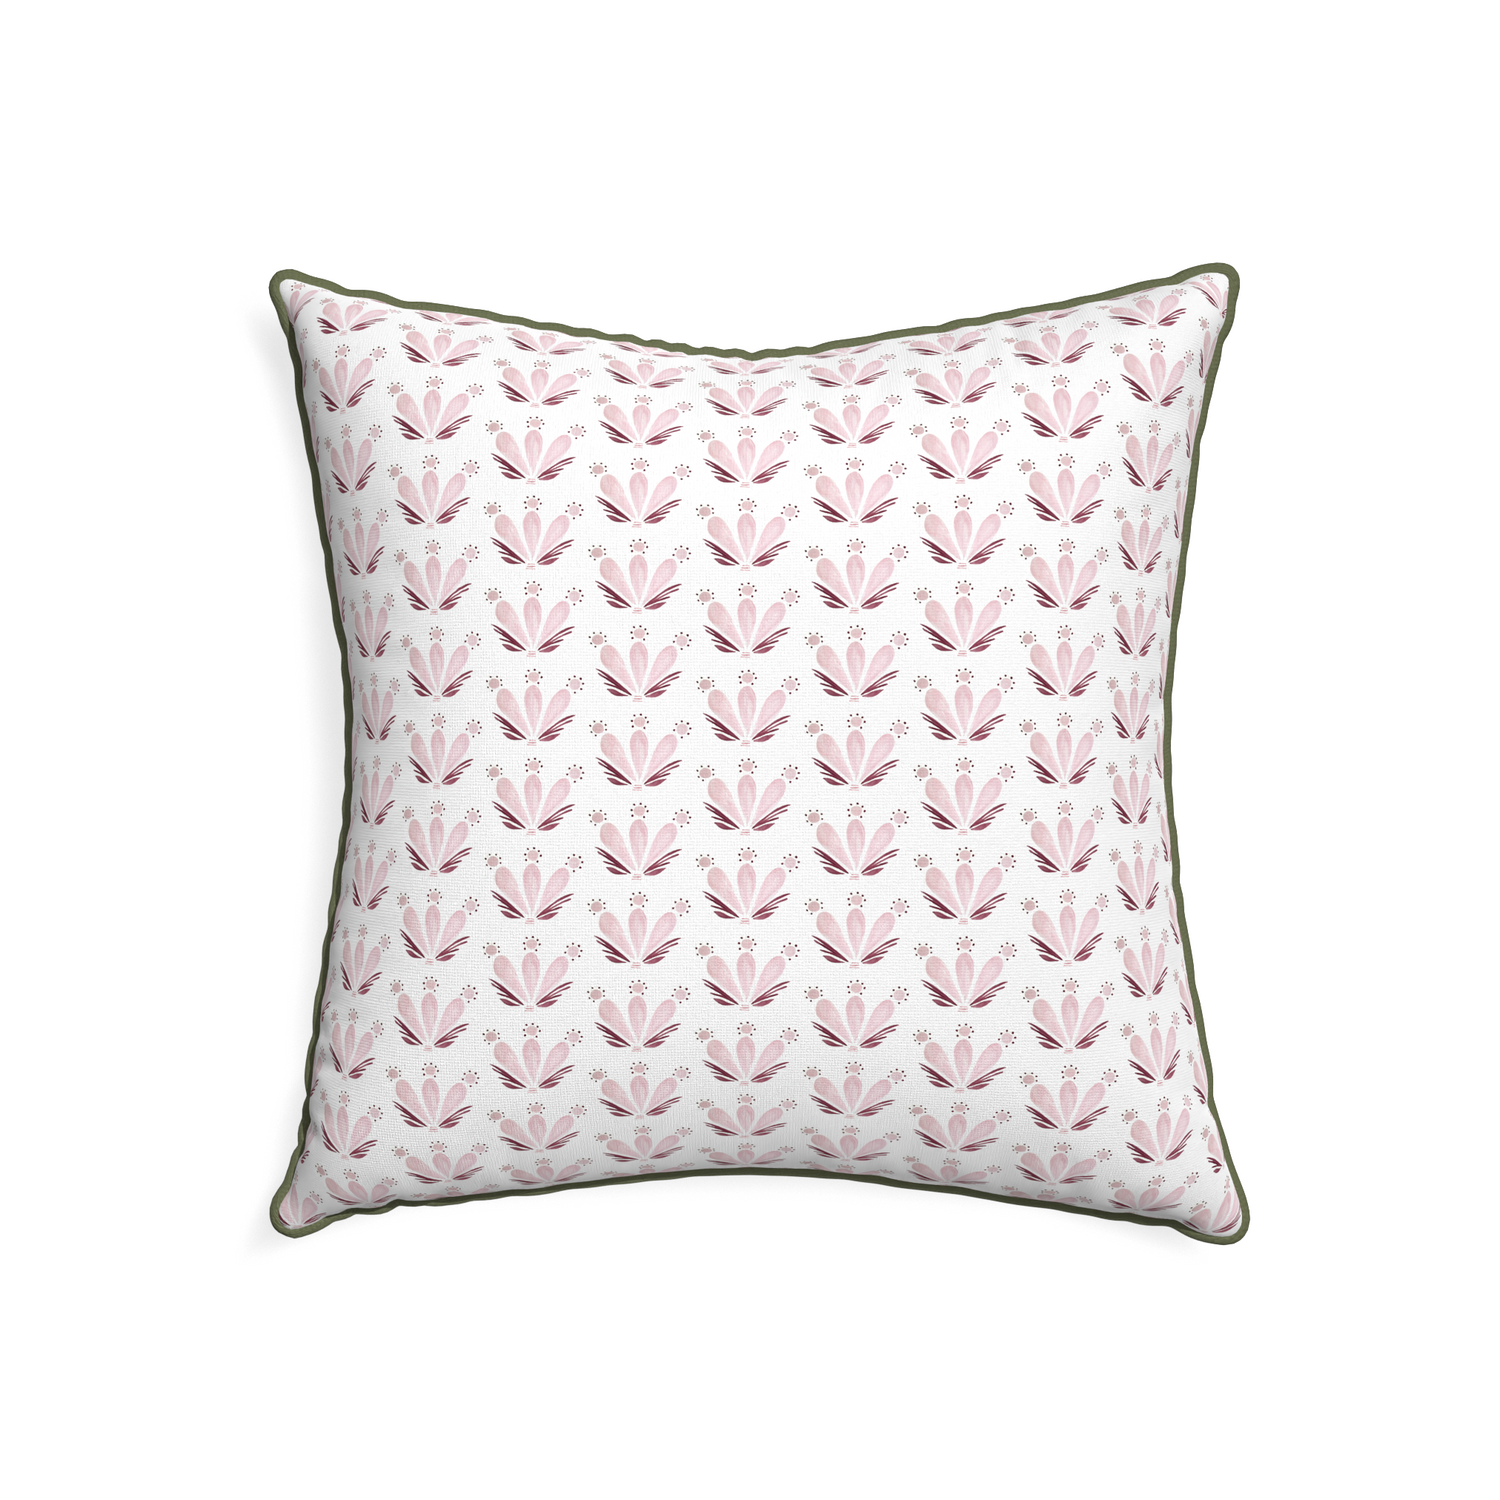 22-square serena pink custom pillow with f piping on white background